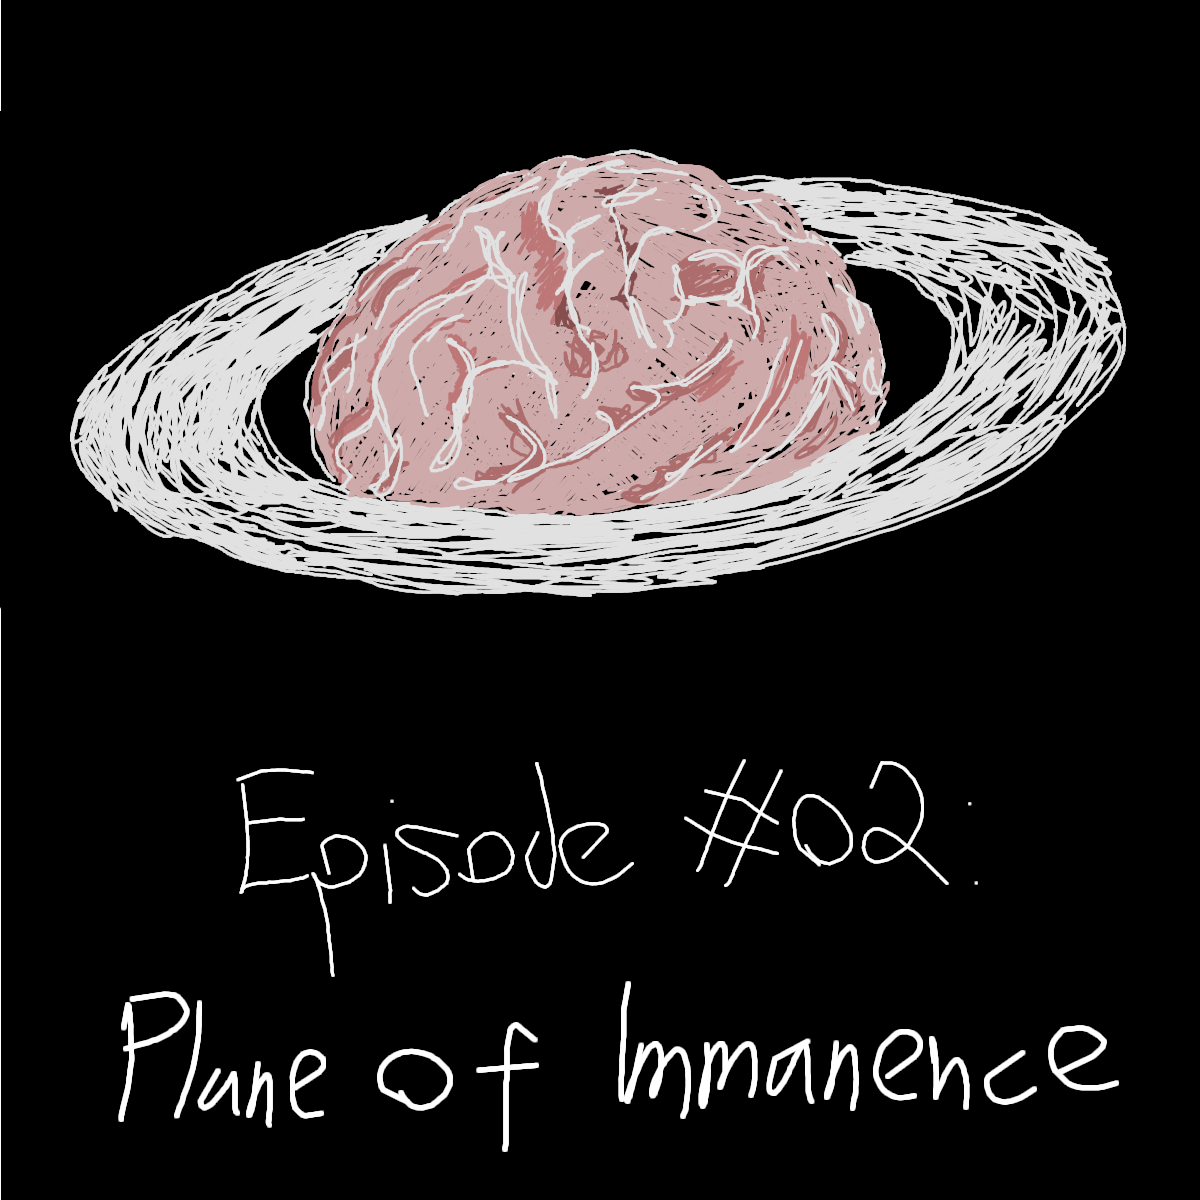 Episode #02: Plane of Immanence